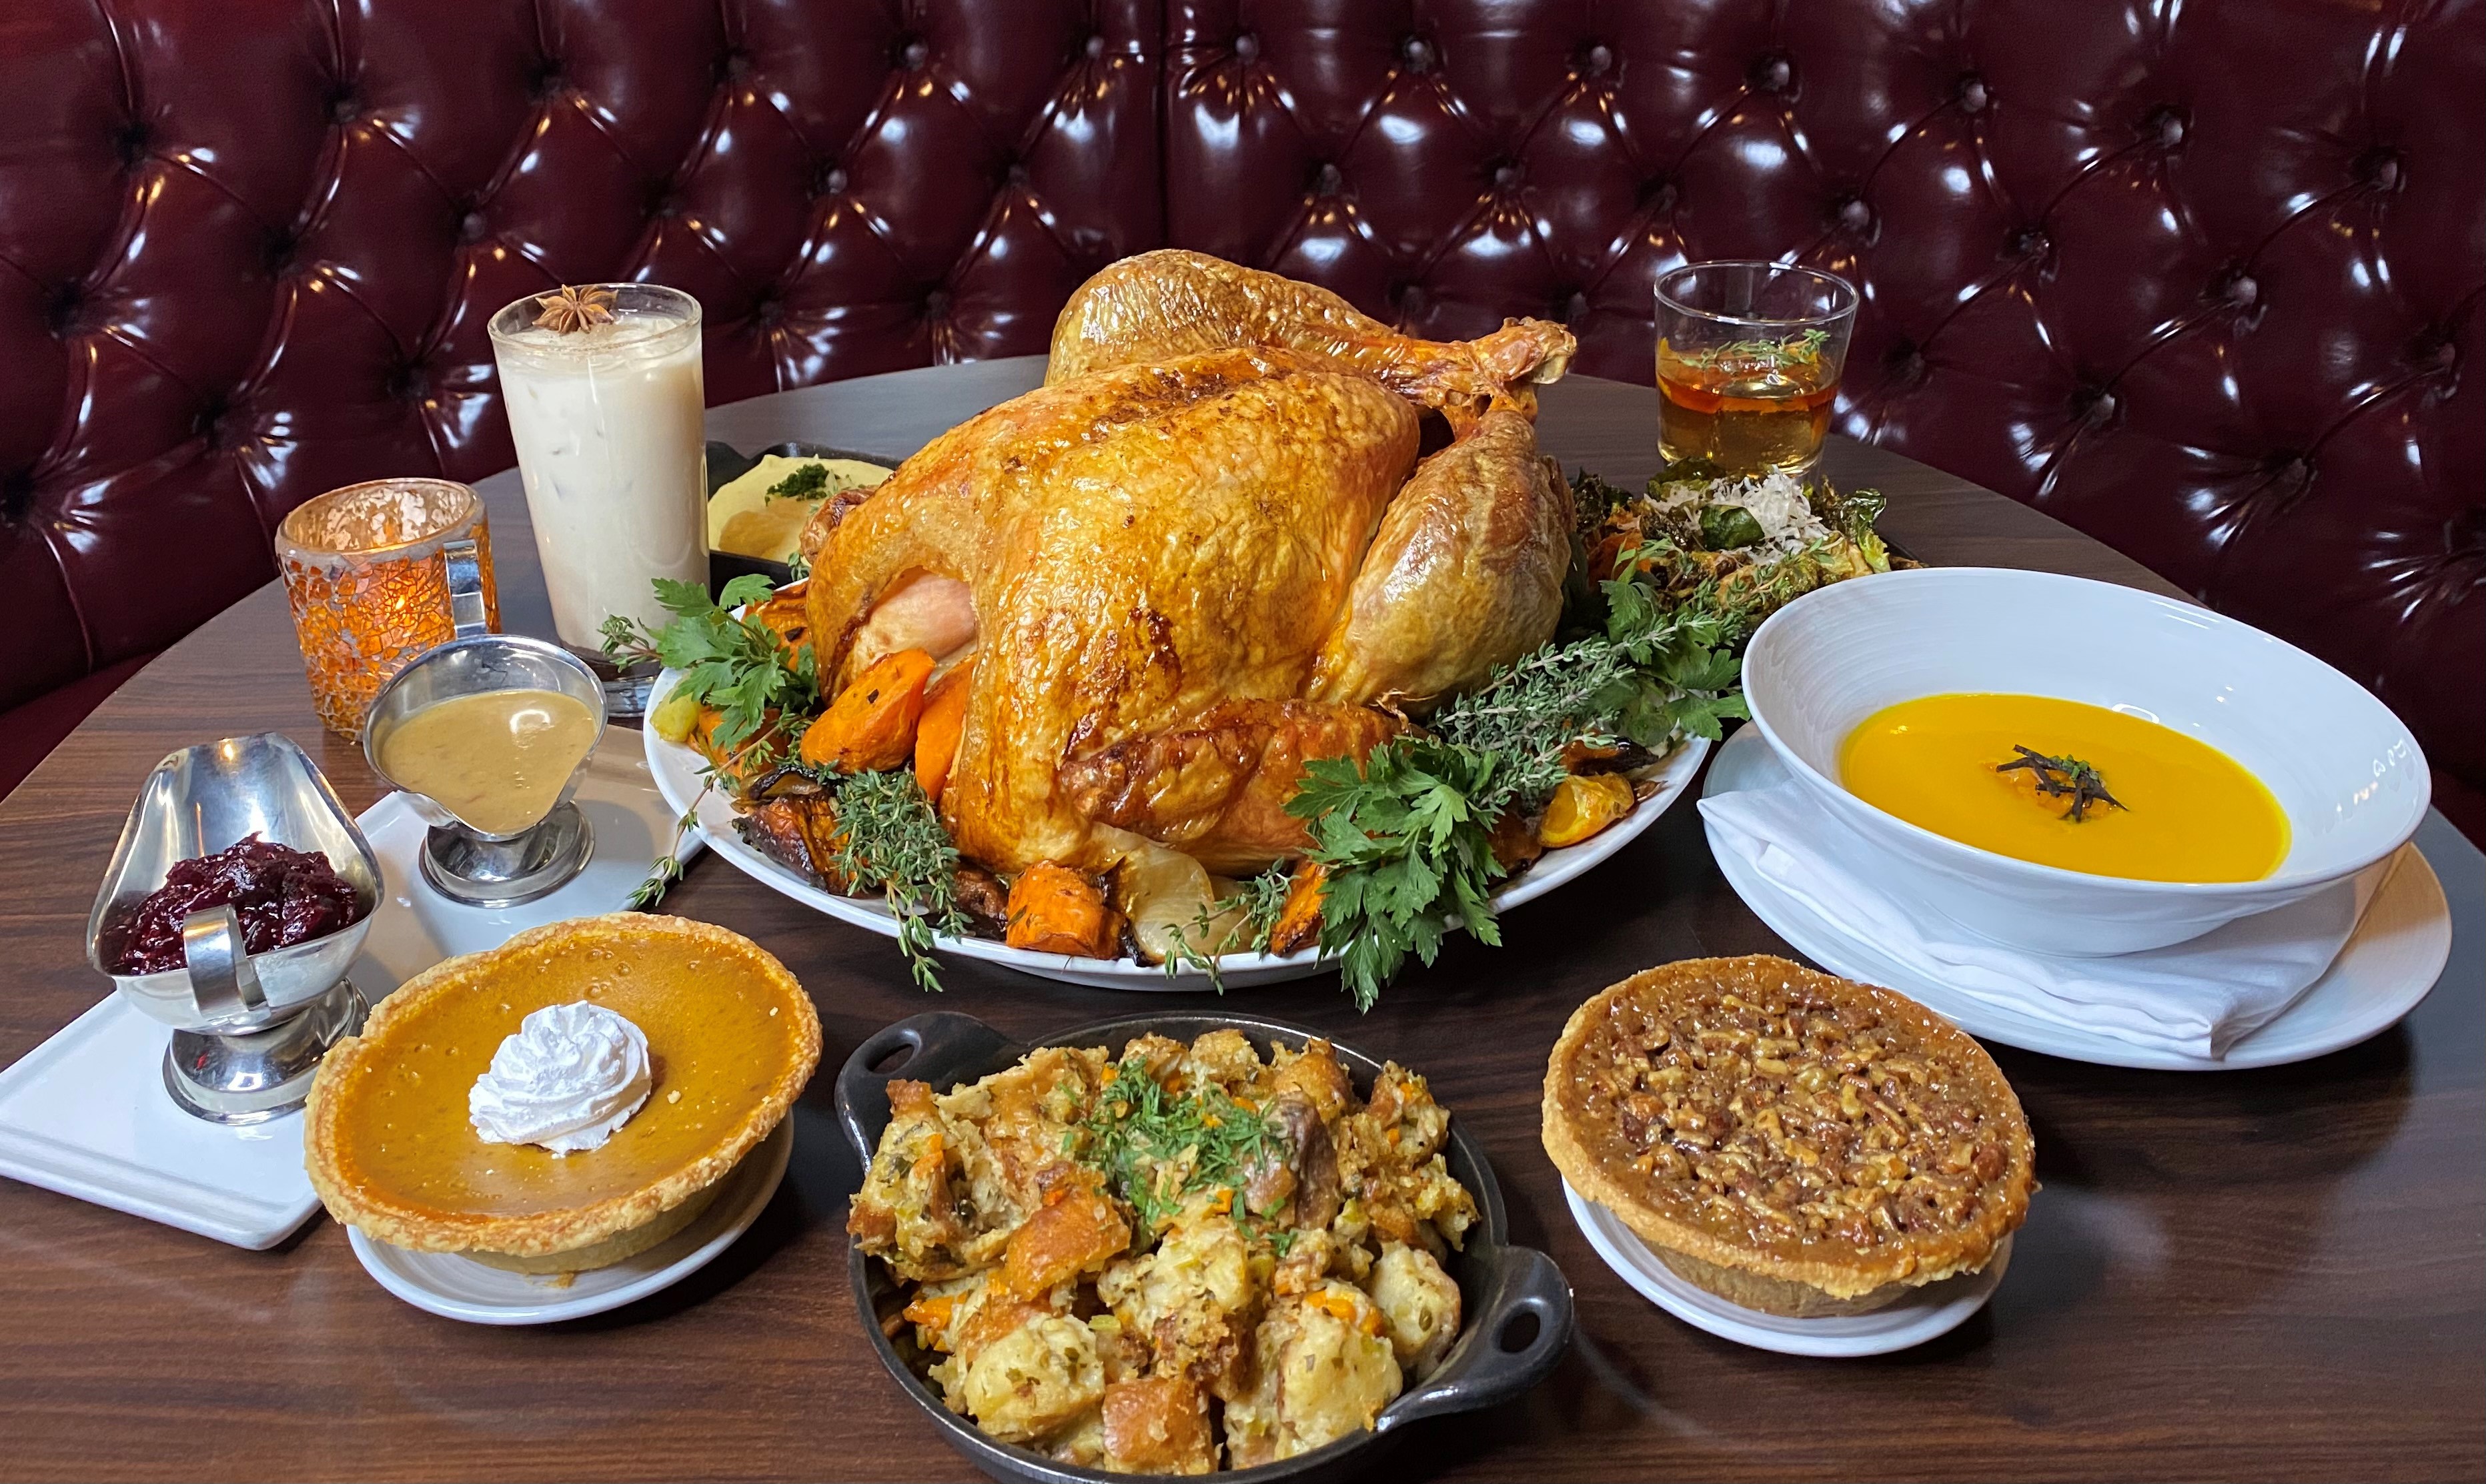 Stuff Yourself With Thanksgiving Dinner at a Las Vegas Buffet